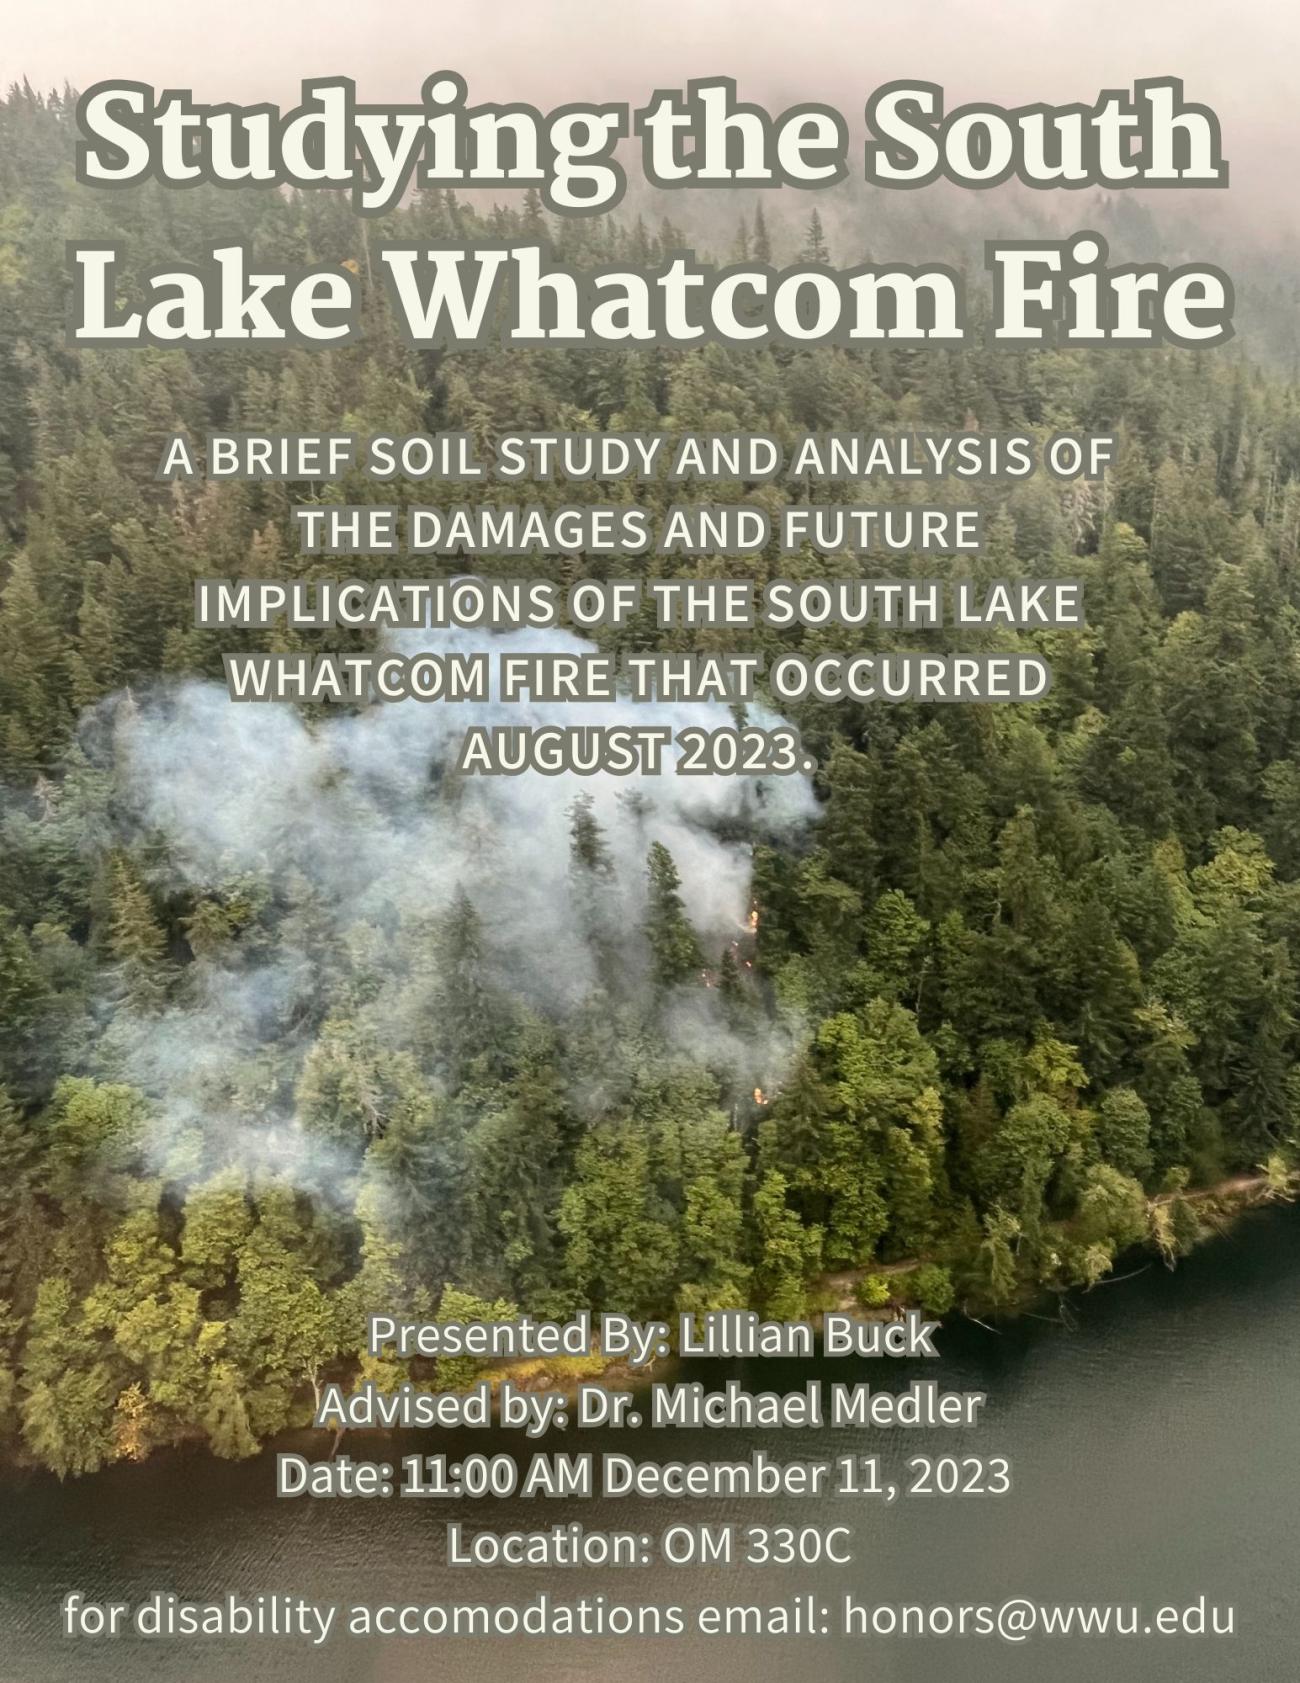 An image of the South Lake Whatcom Fire. Text says: Studying the South Lake Whatcom Fire, A brief soil study and analysis of the damages and future implications of the South Lake Whatcom Fire that occured in August 2023. Presented by Lillian Buck. Advised by Michael Medler. Location Old Main 330C, on December 11, 2023 at 11:00.